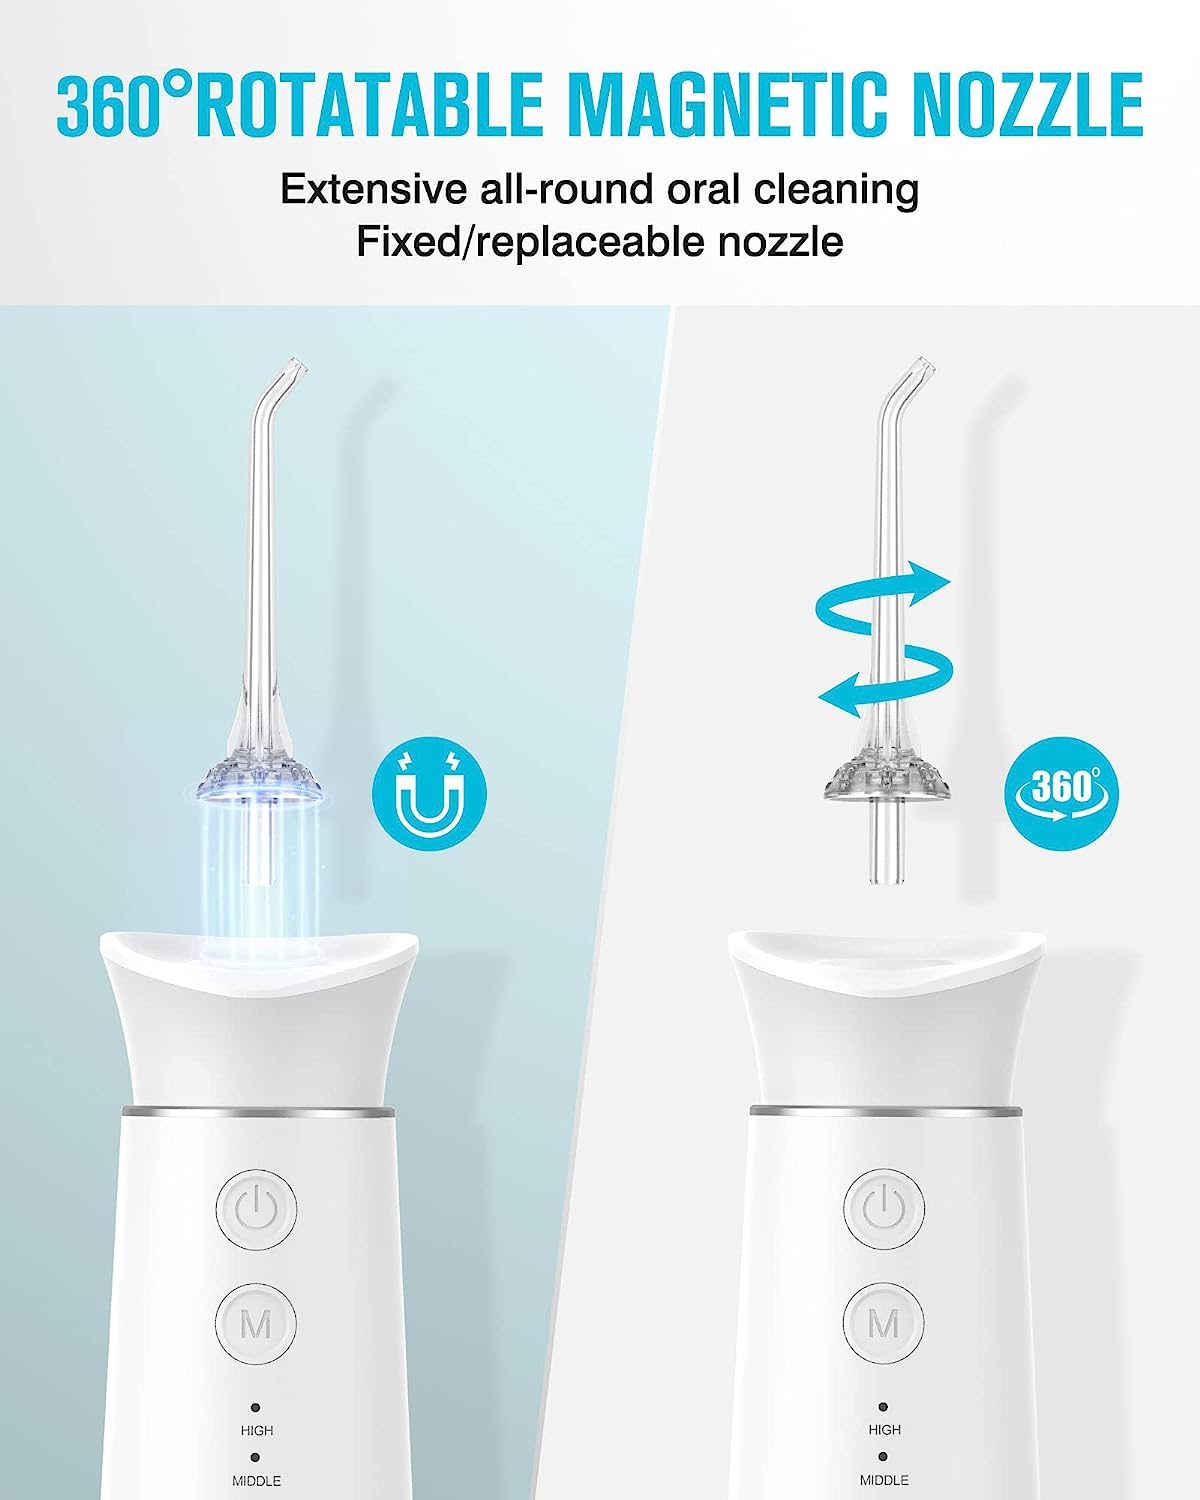 ZNTS Water Dental Flosser Cordless with Magnetic Charging for Teeth Cleaning, Nursal 7 Clean Settings 25805733